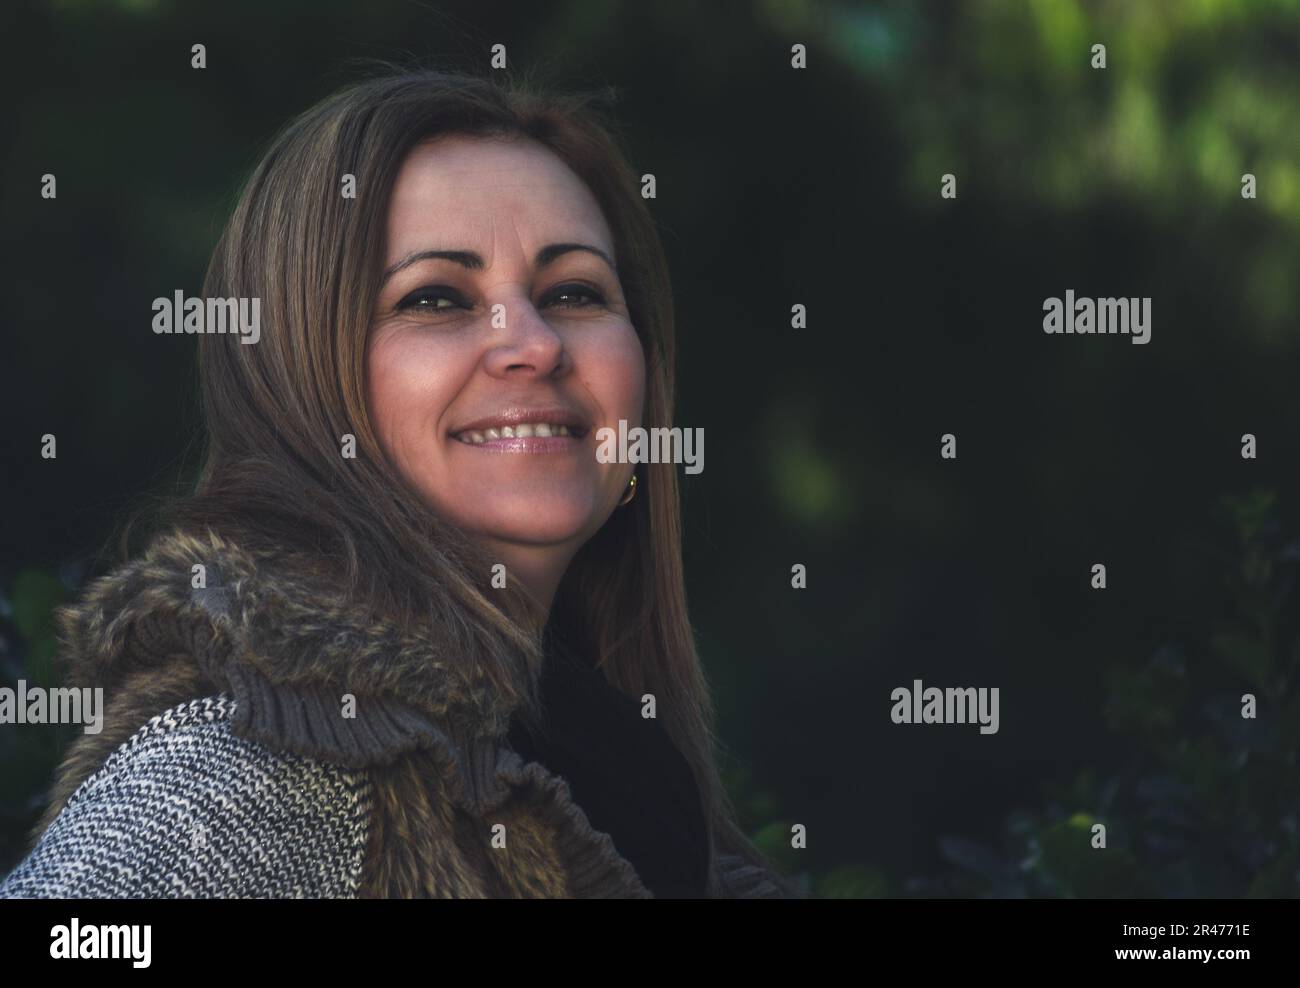 Portrait of smiling middle aged blonde woman in nature, defocused dark green background. Lifestyle concept. Stock Photo